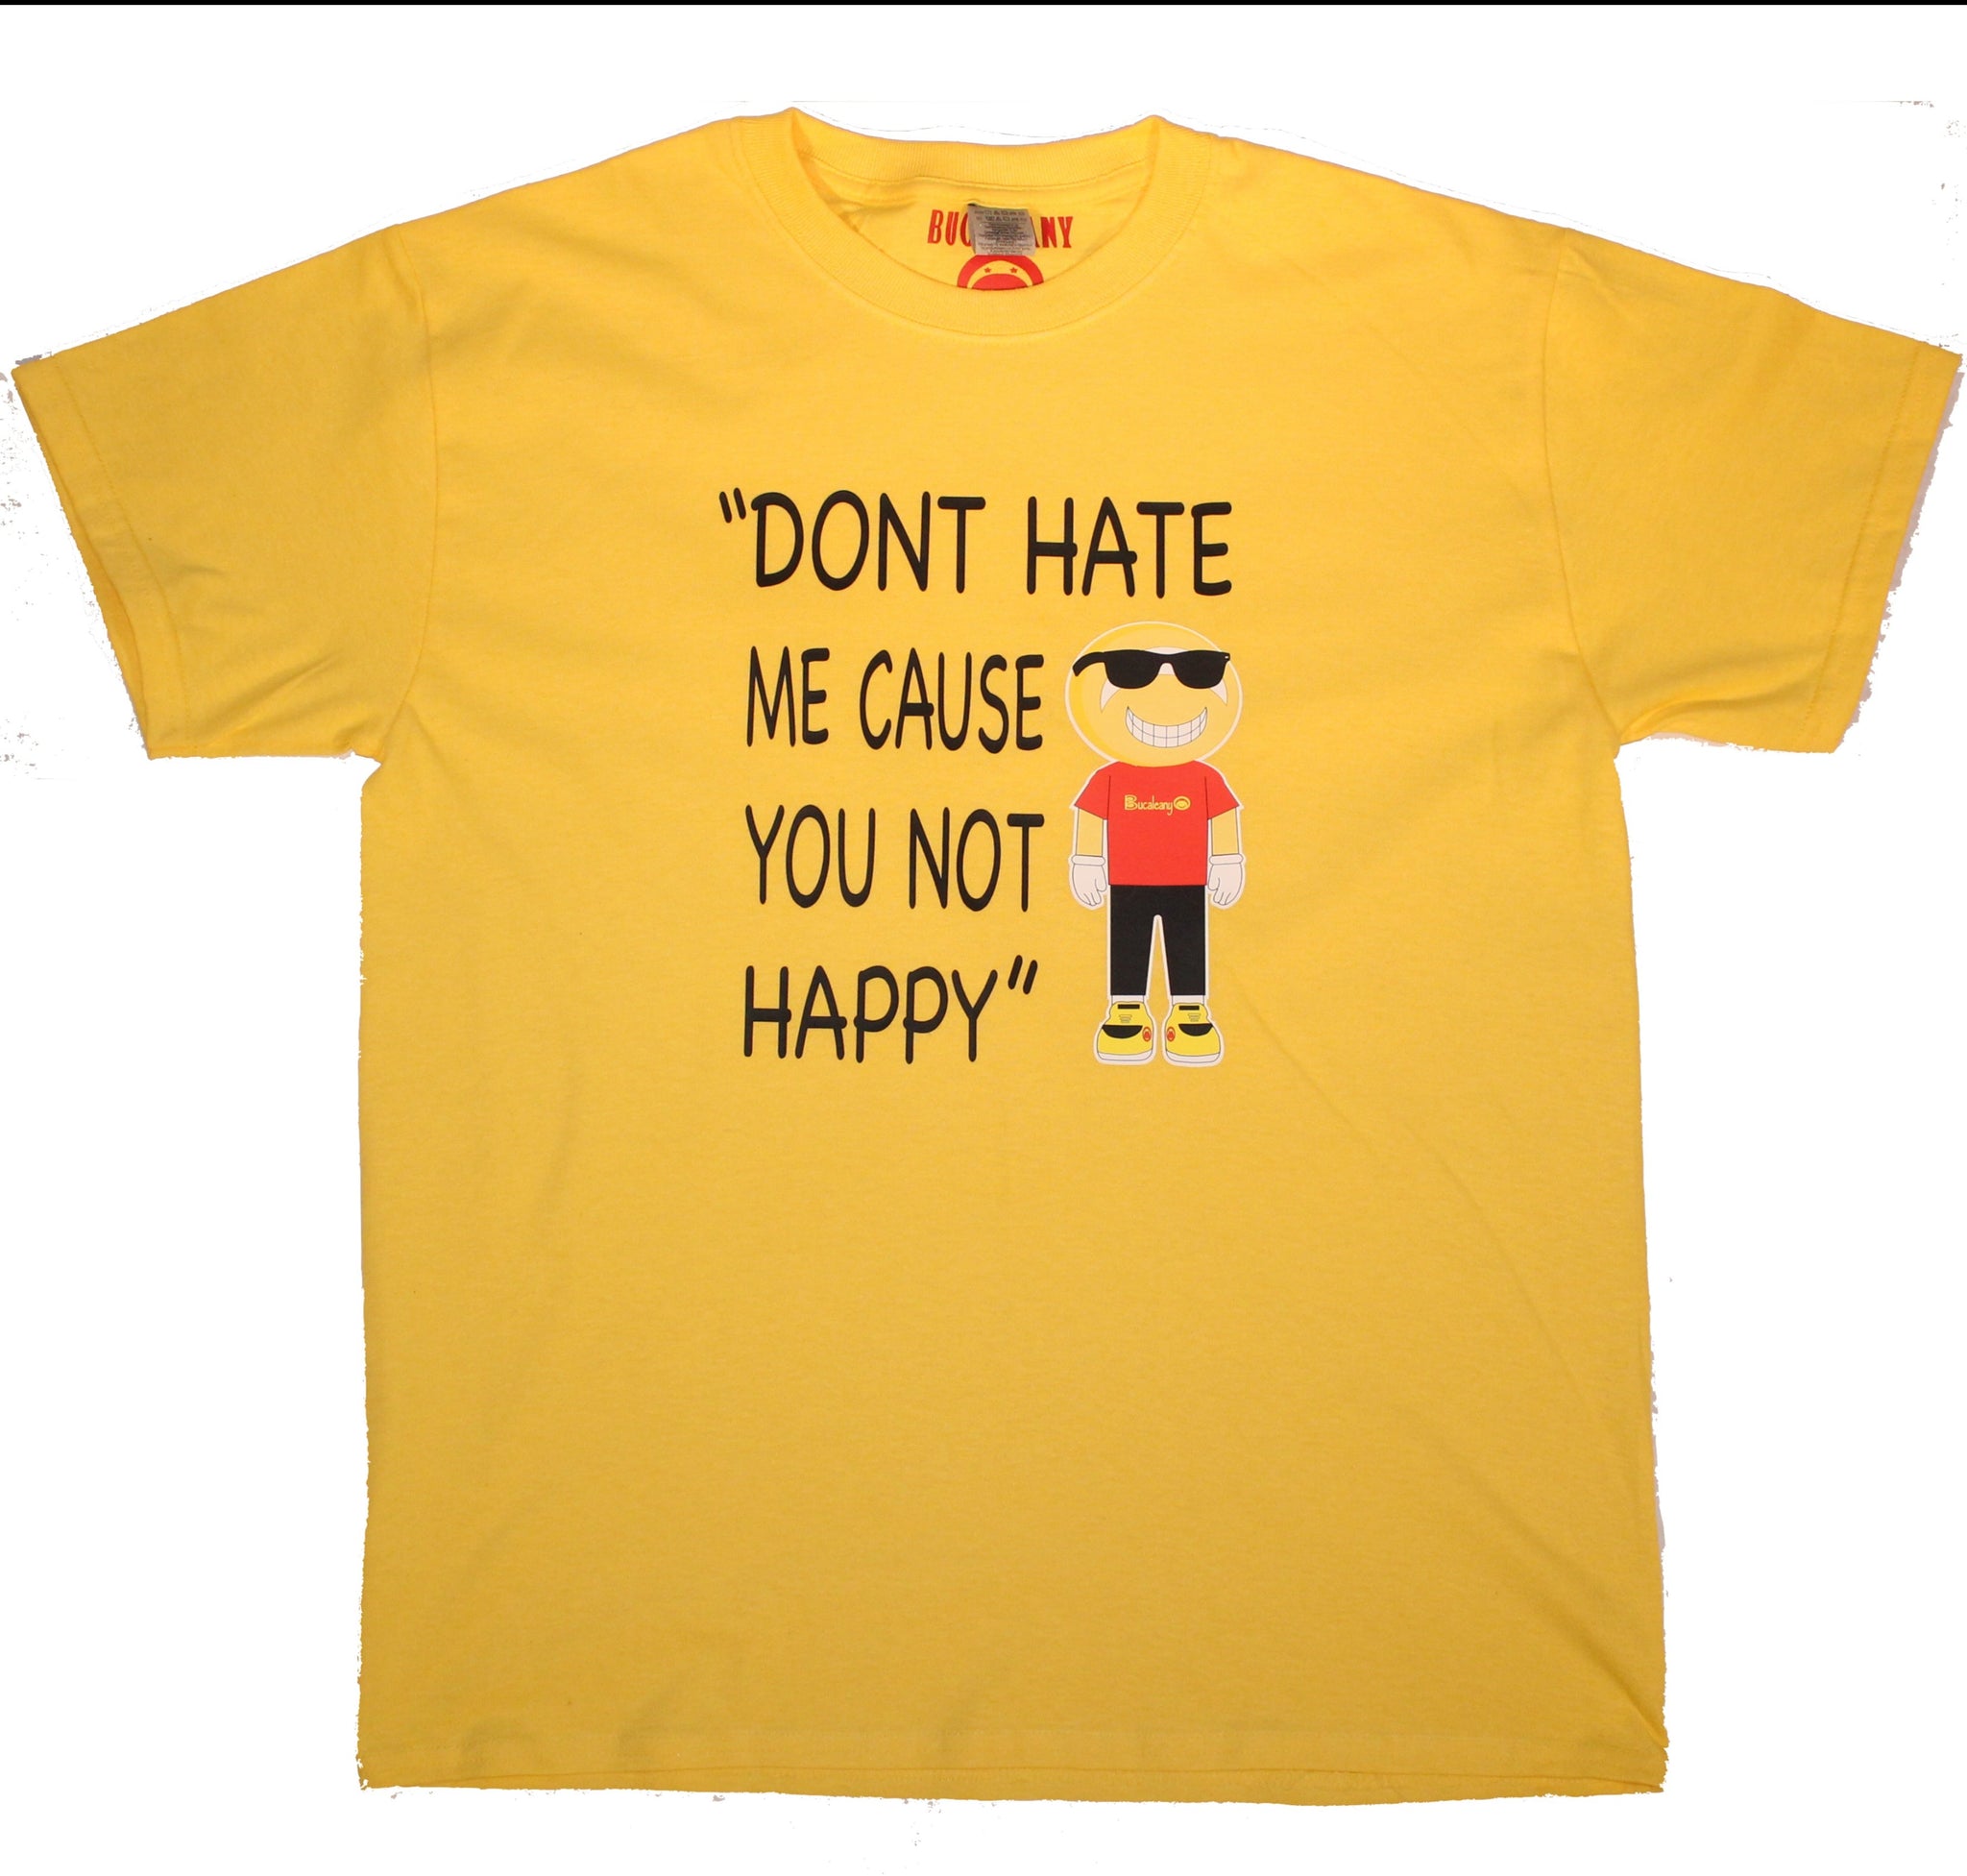 NEW Bucaleany "DON'T HATE ME CAUSE YOU NOT HAPPY" T-shirt